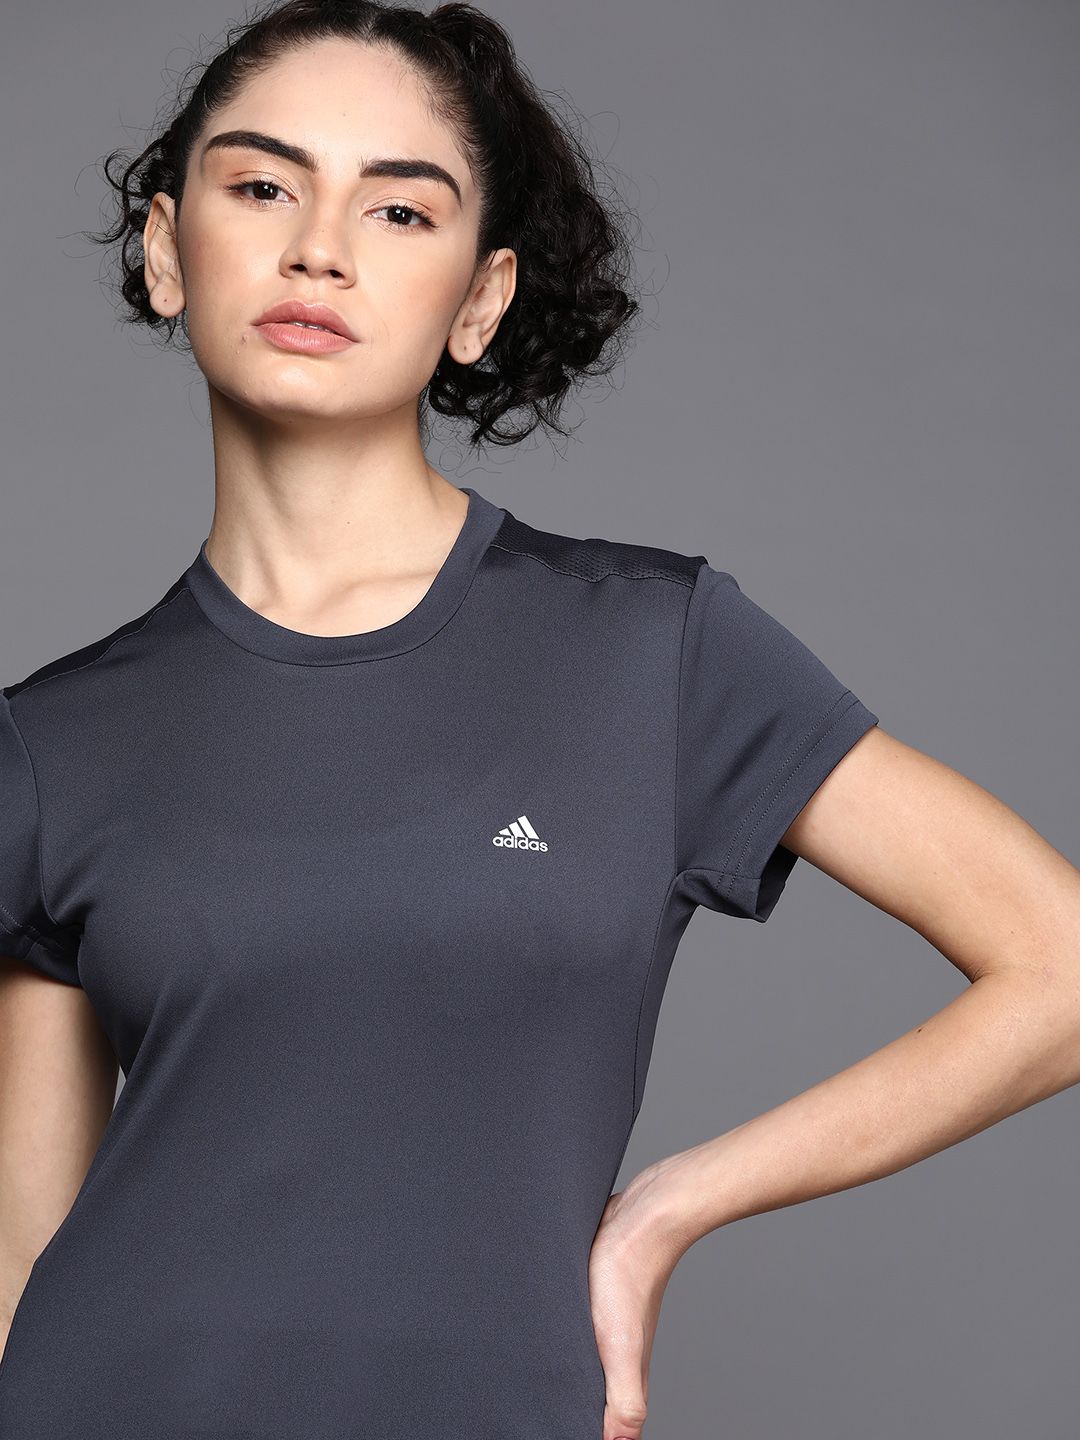 ADIDAS Women Navy Blue Printed Slim Fit T-shirt Price in India